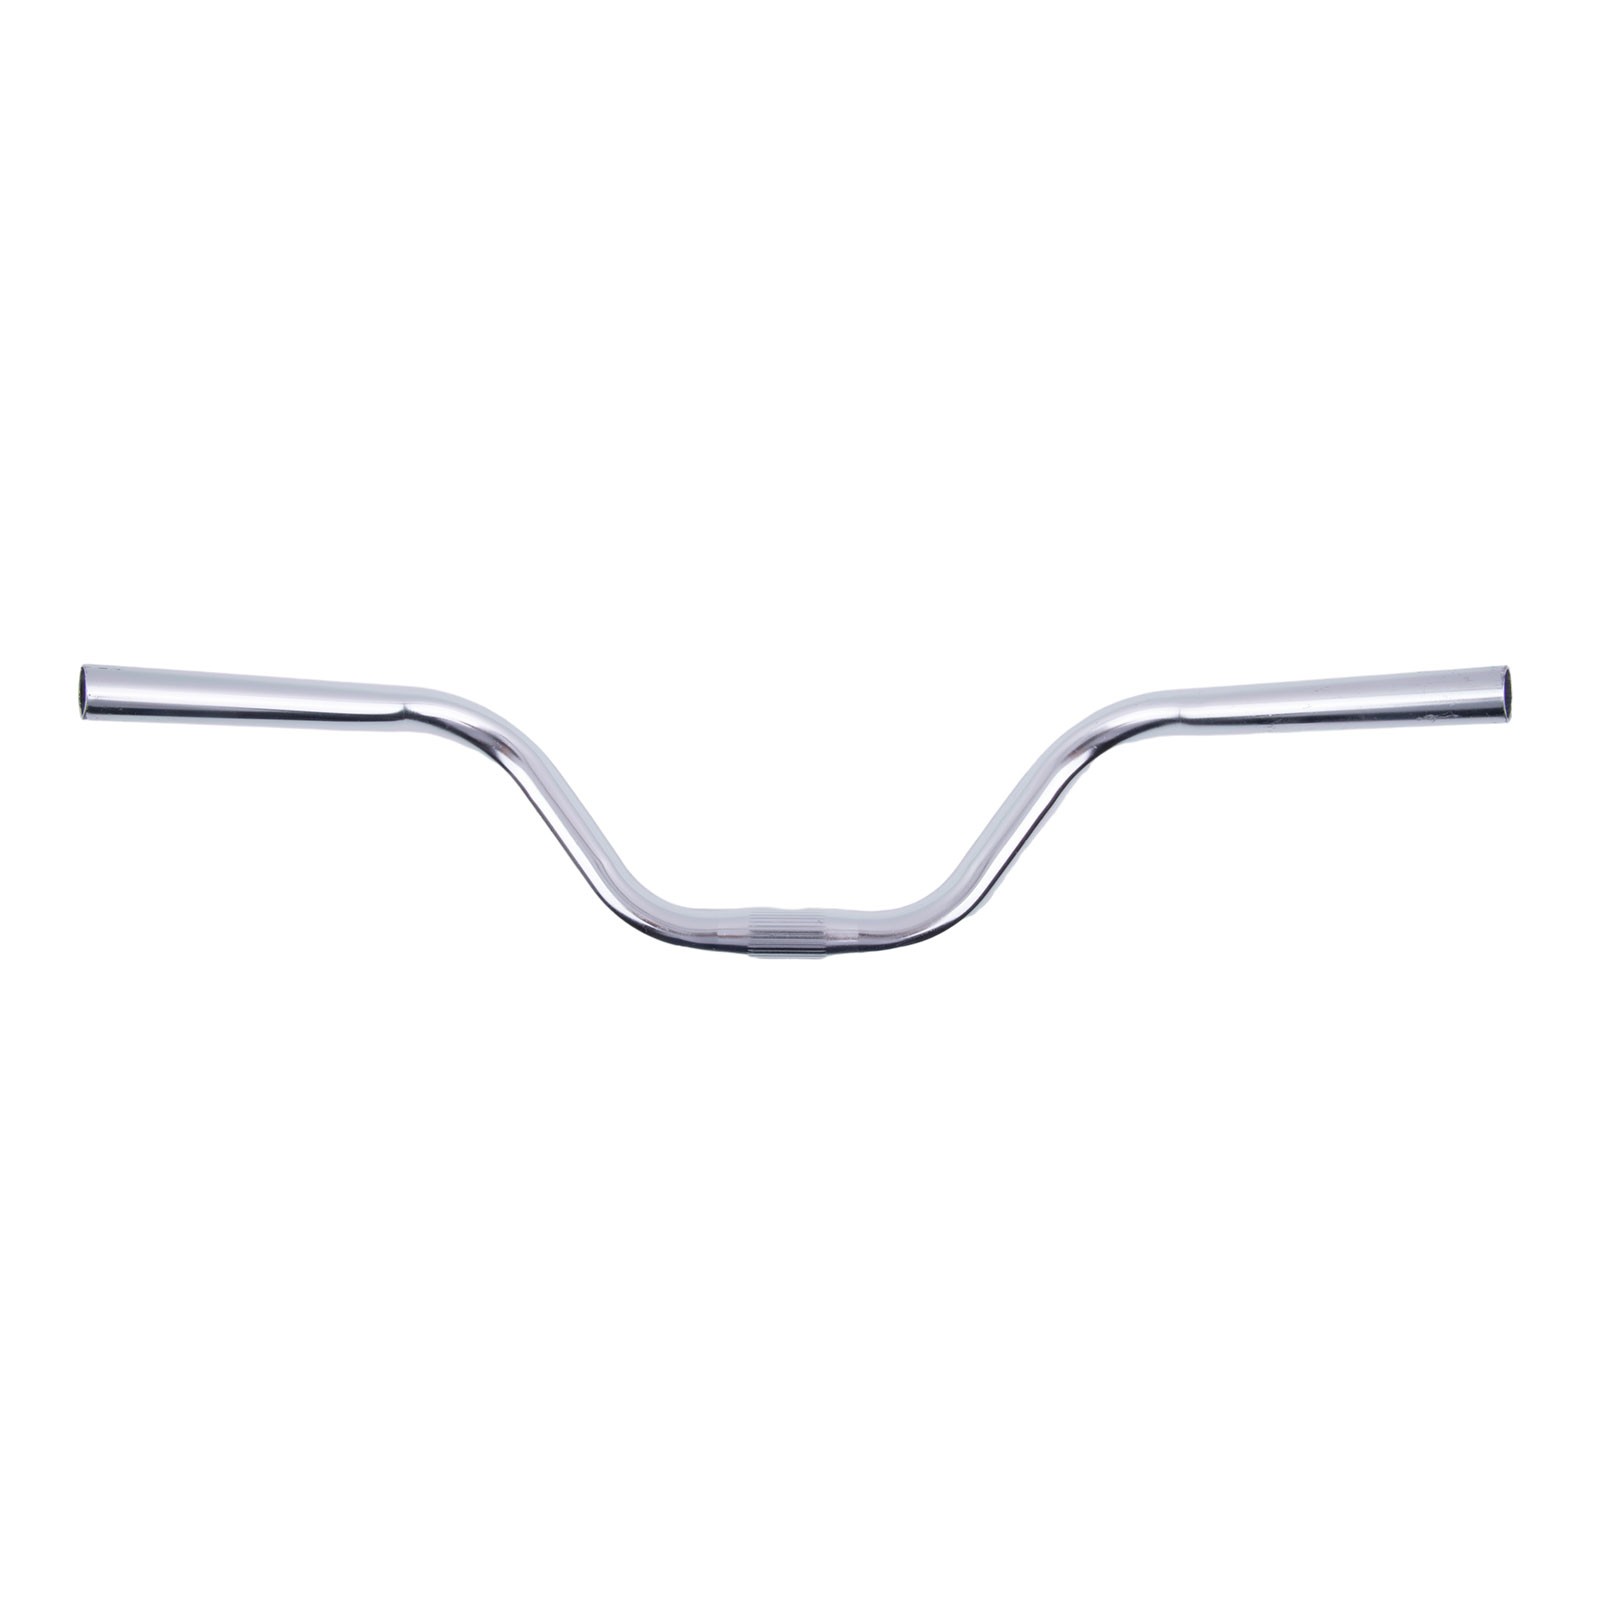 Raleigh Alloy All Rounder Handlebars - Bicycle Trekking Comfort Cruiser Sit Up - image 4 of 8